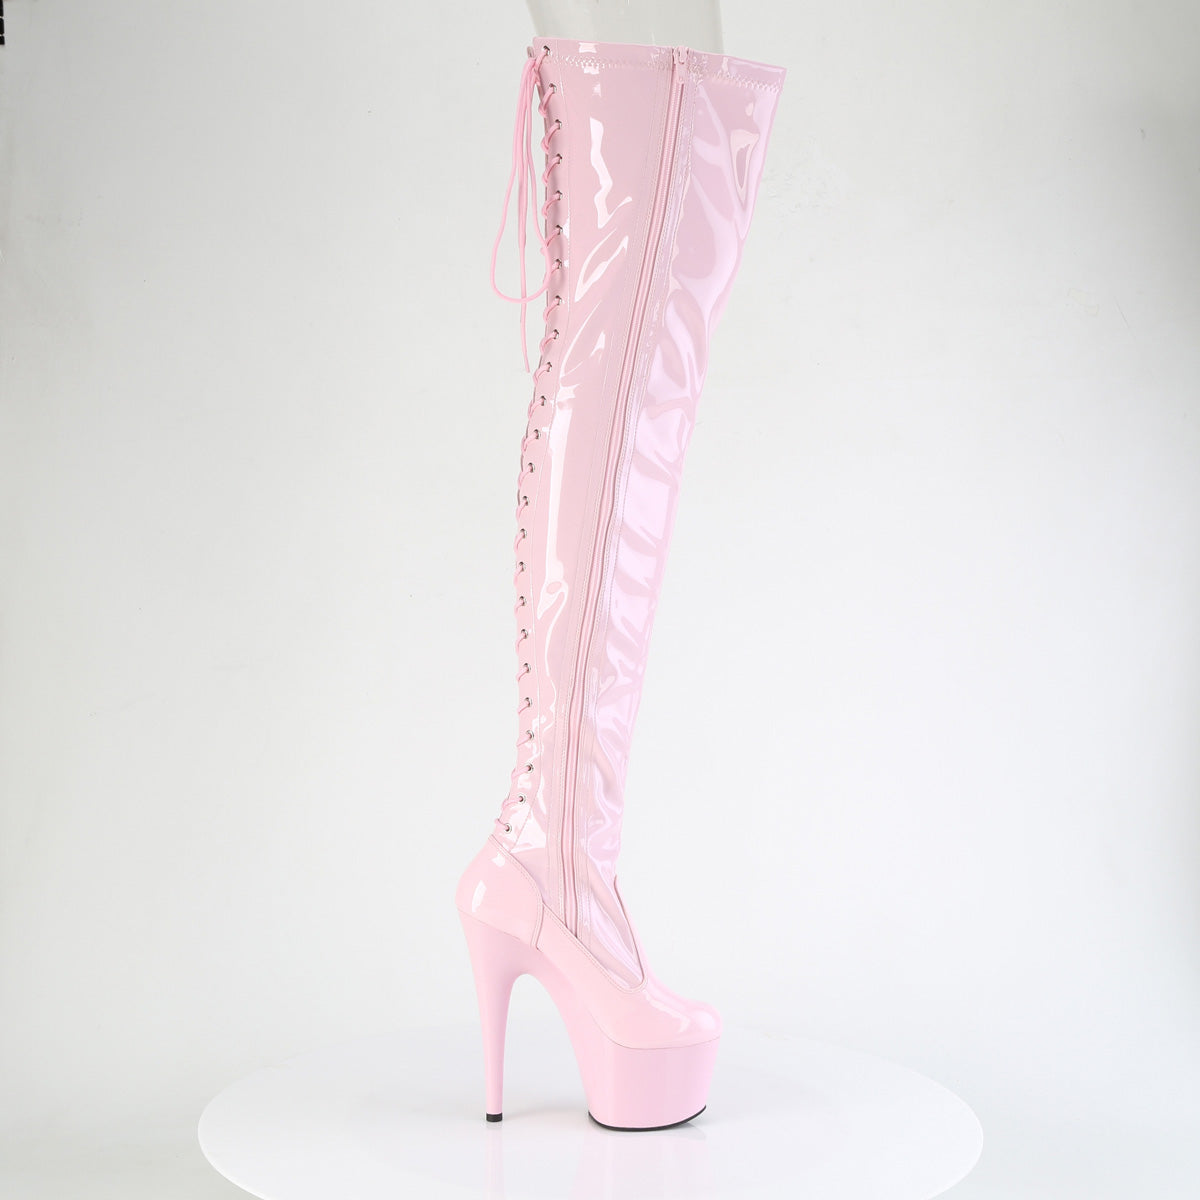 ADORE-3850 Pleaser Baby Pink Pole Dancing Thigh High Boots